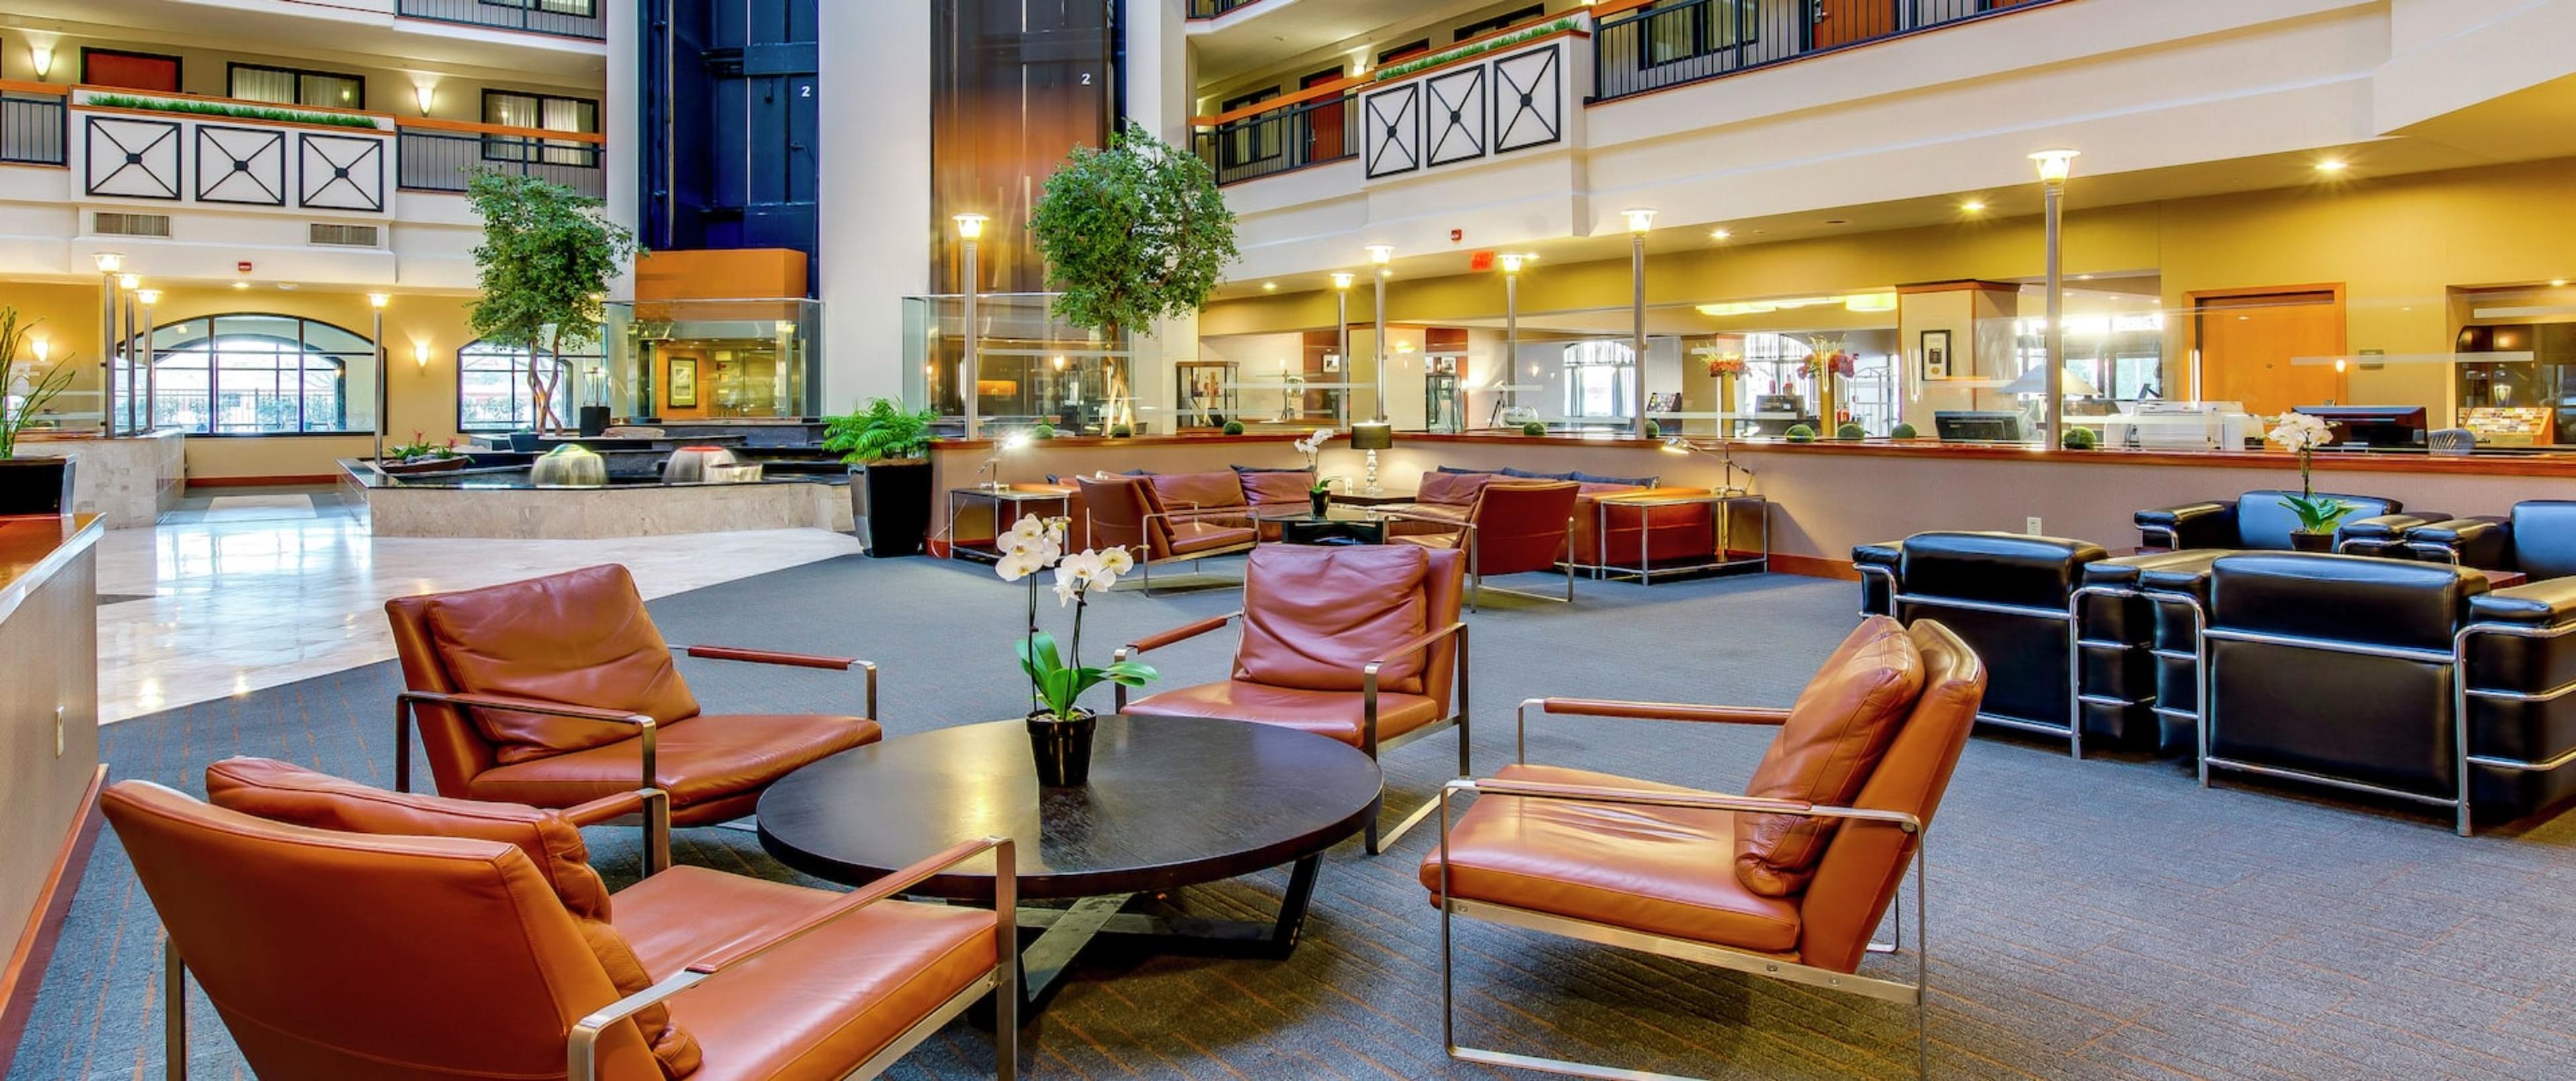 Embassy Suites by Hilton Louisville East